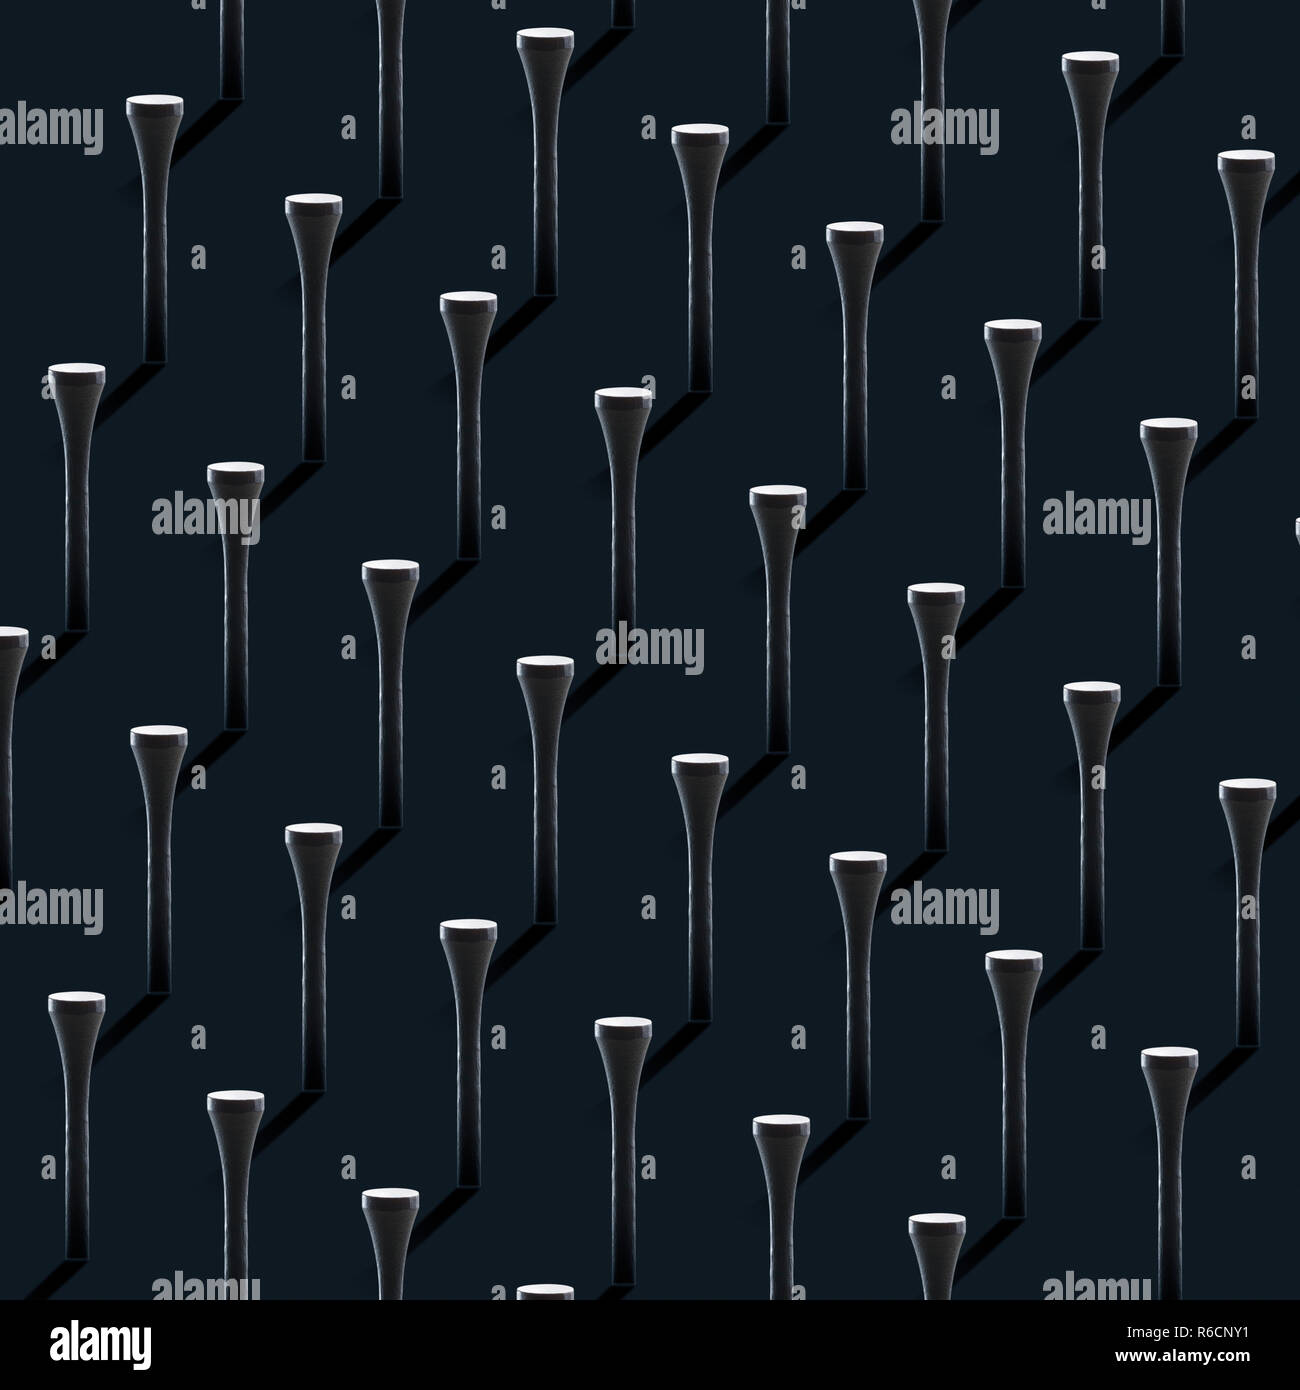 Ordered monochrome design of golf tees in line with dark background Stock Photo